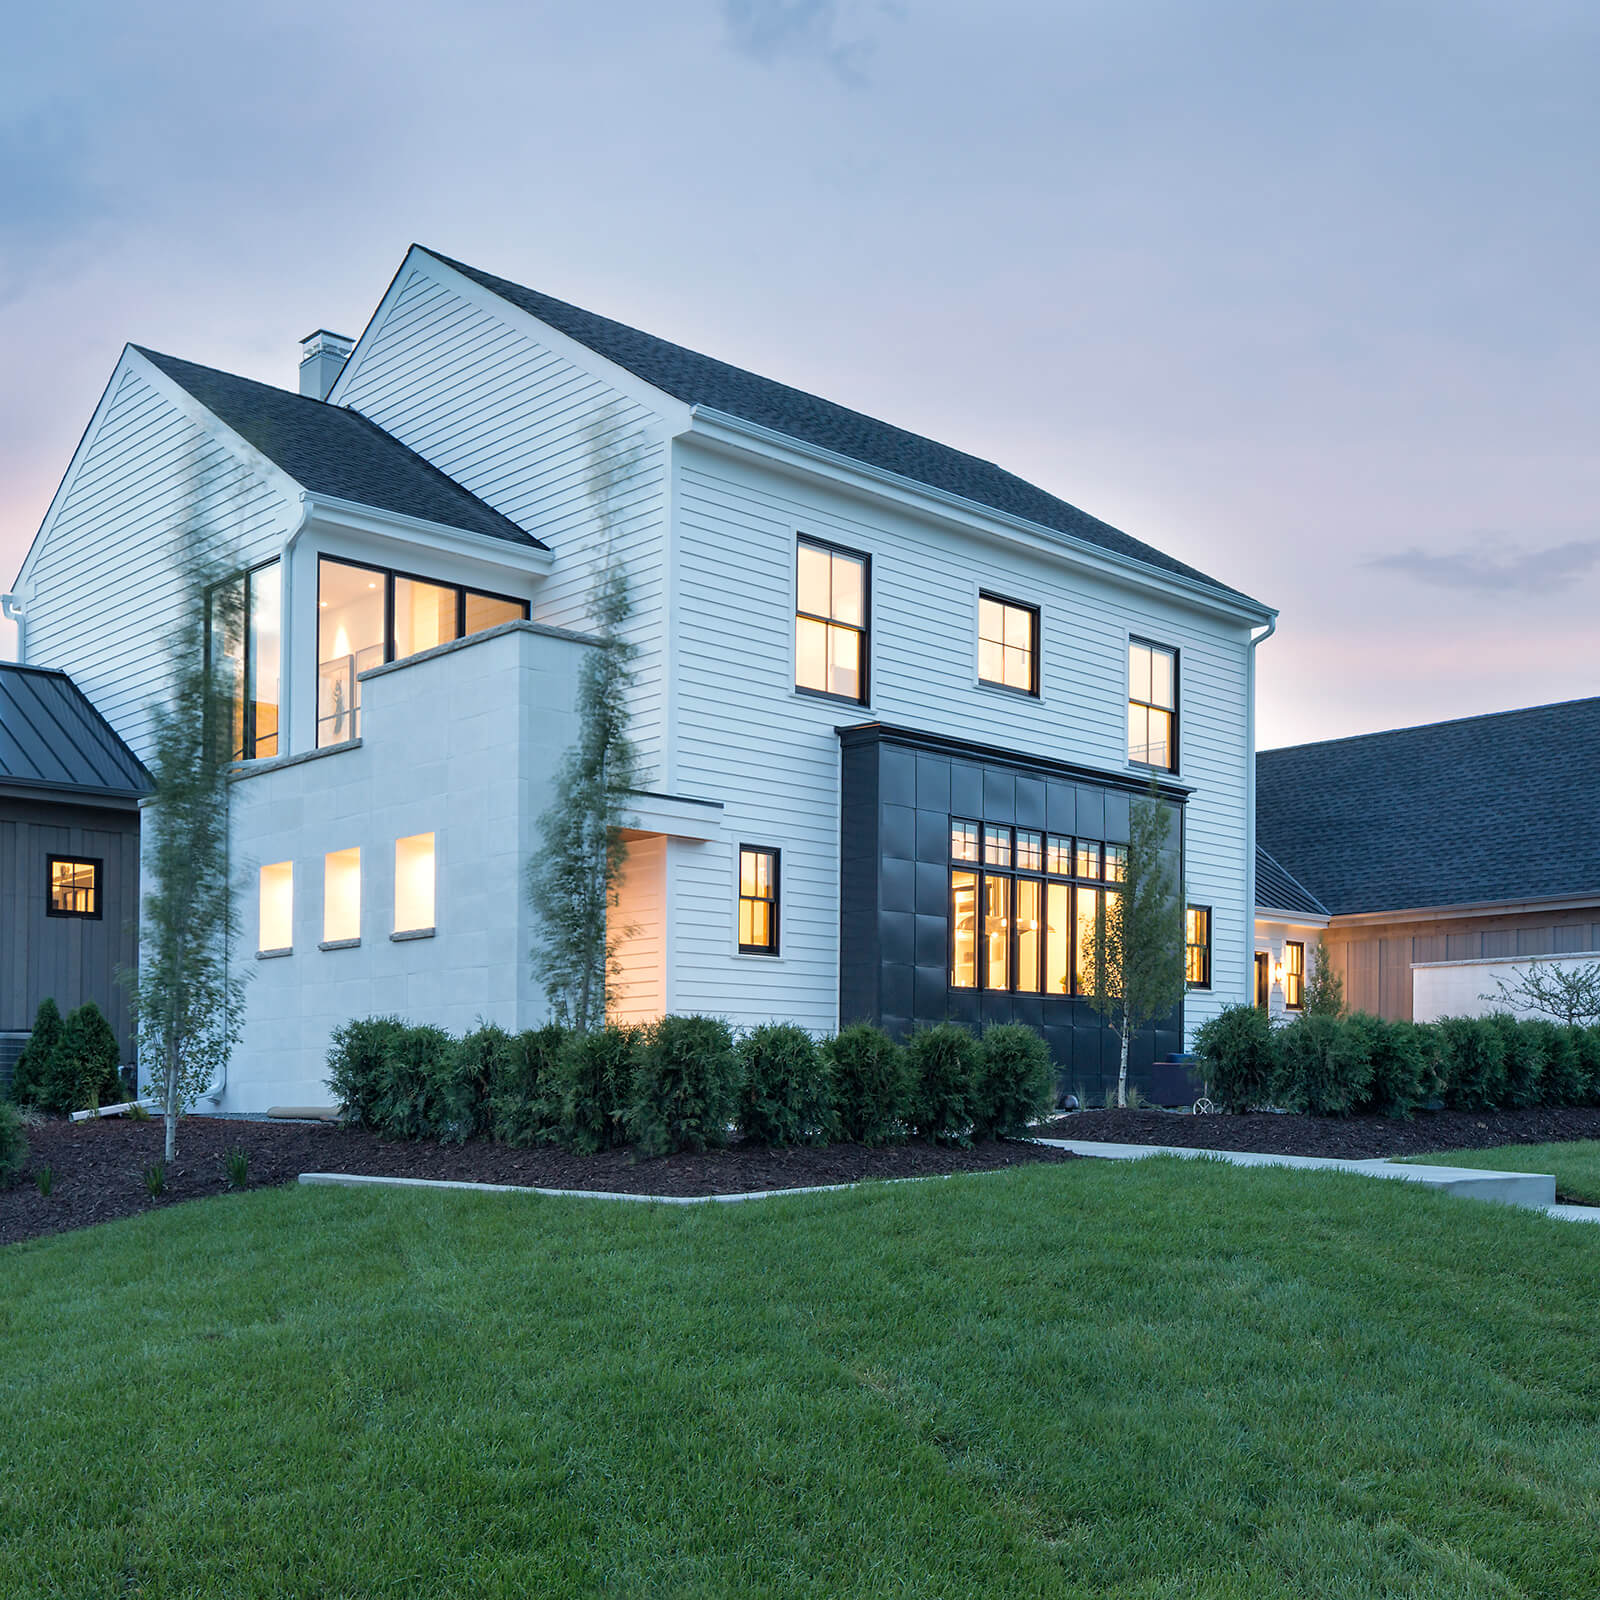 Exterior view of modern style home with Marvin Signature Ultimate Casement Windows and Ultimate Double Hung G2 Windows